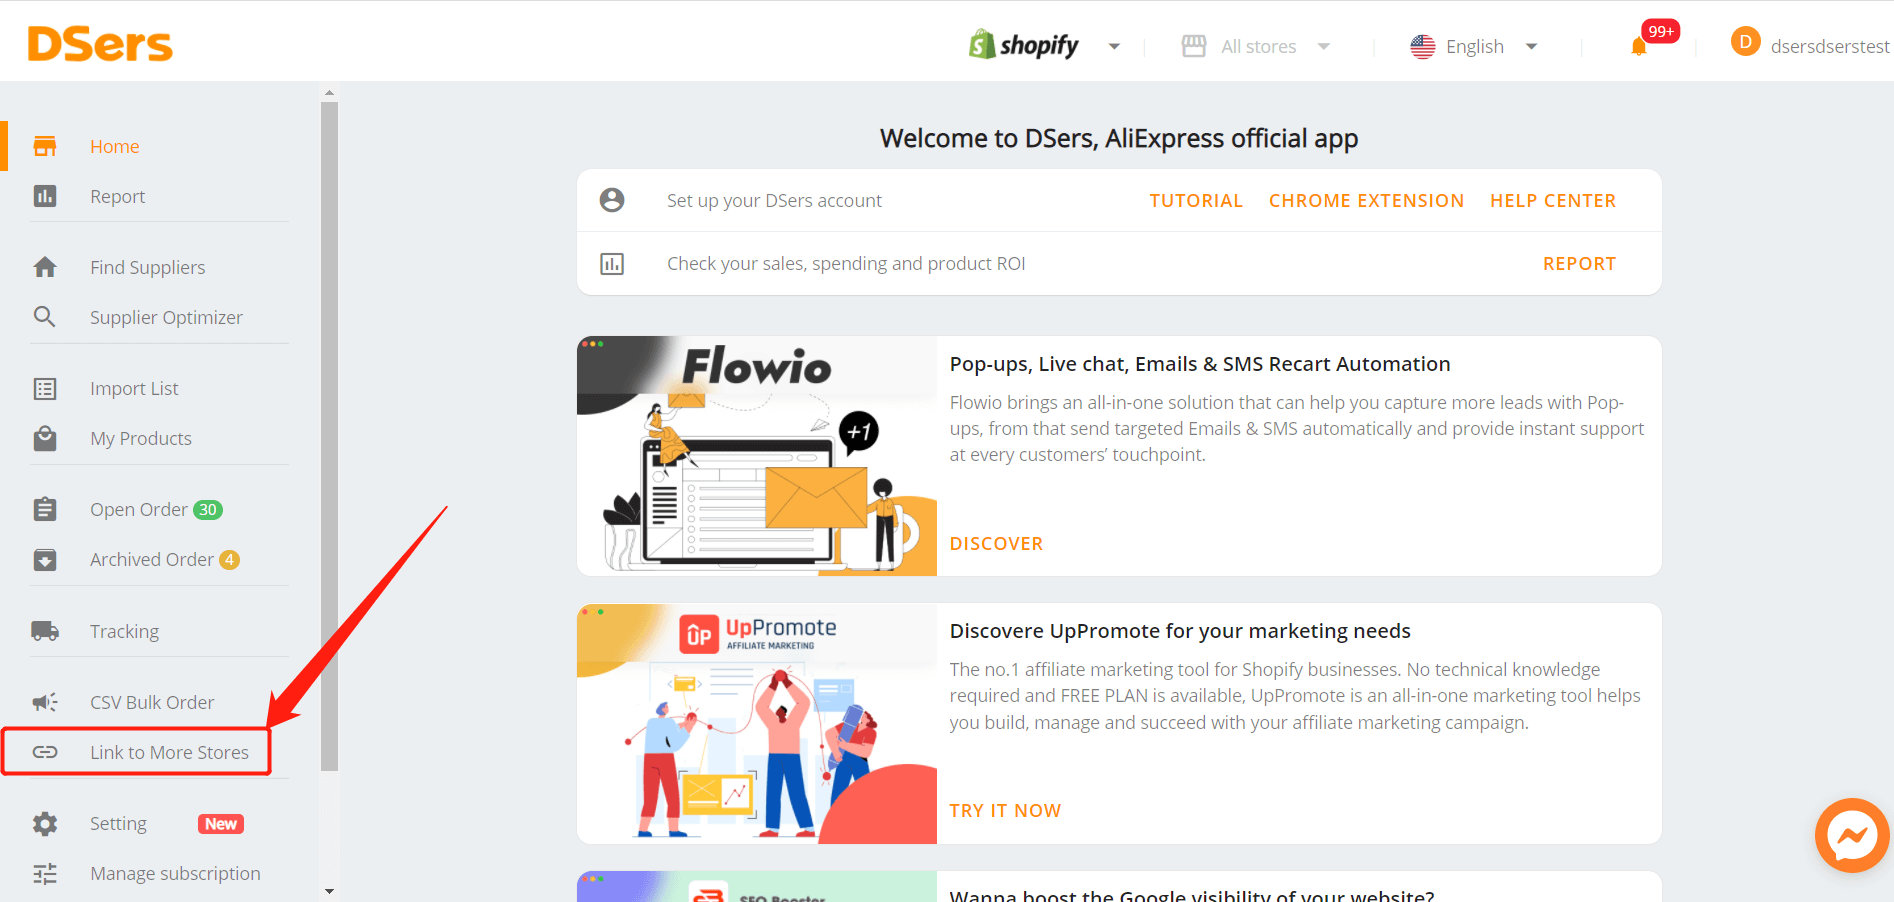 Add a Shopify store - Click on Link to more stores to add a new Shopify store - DSers